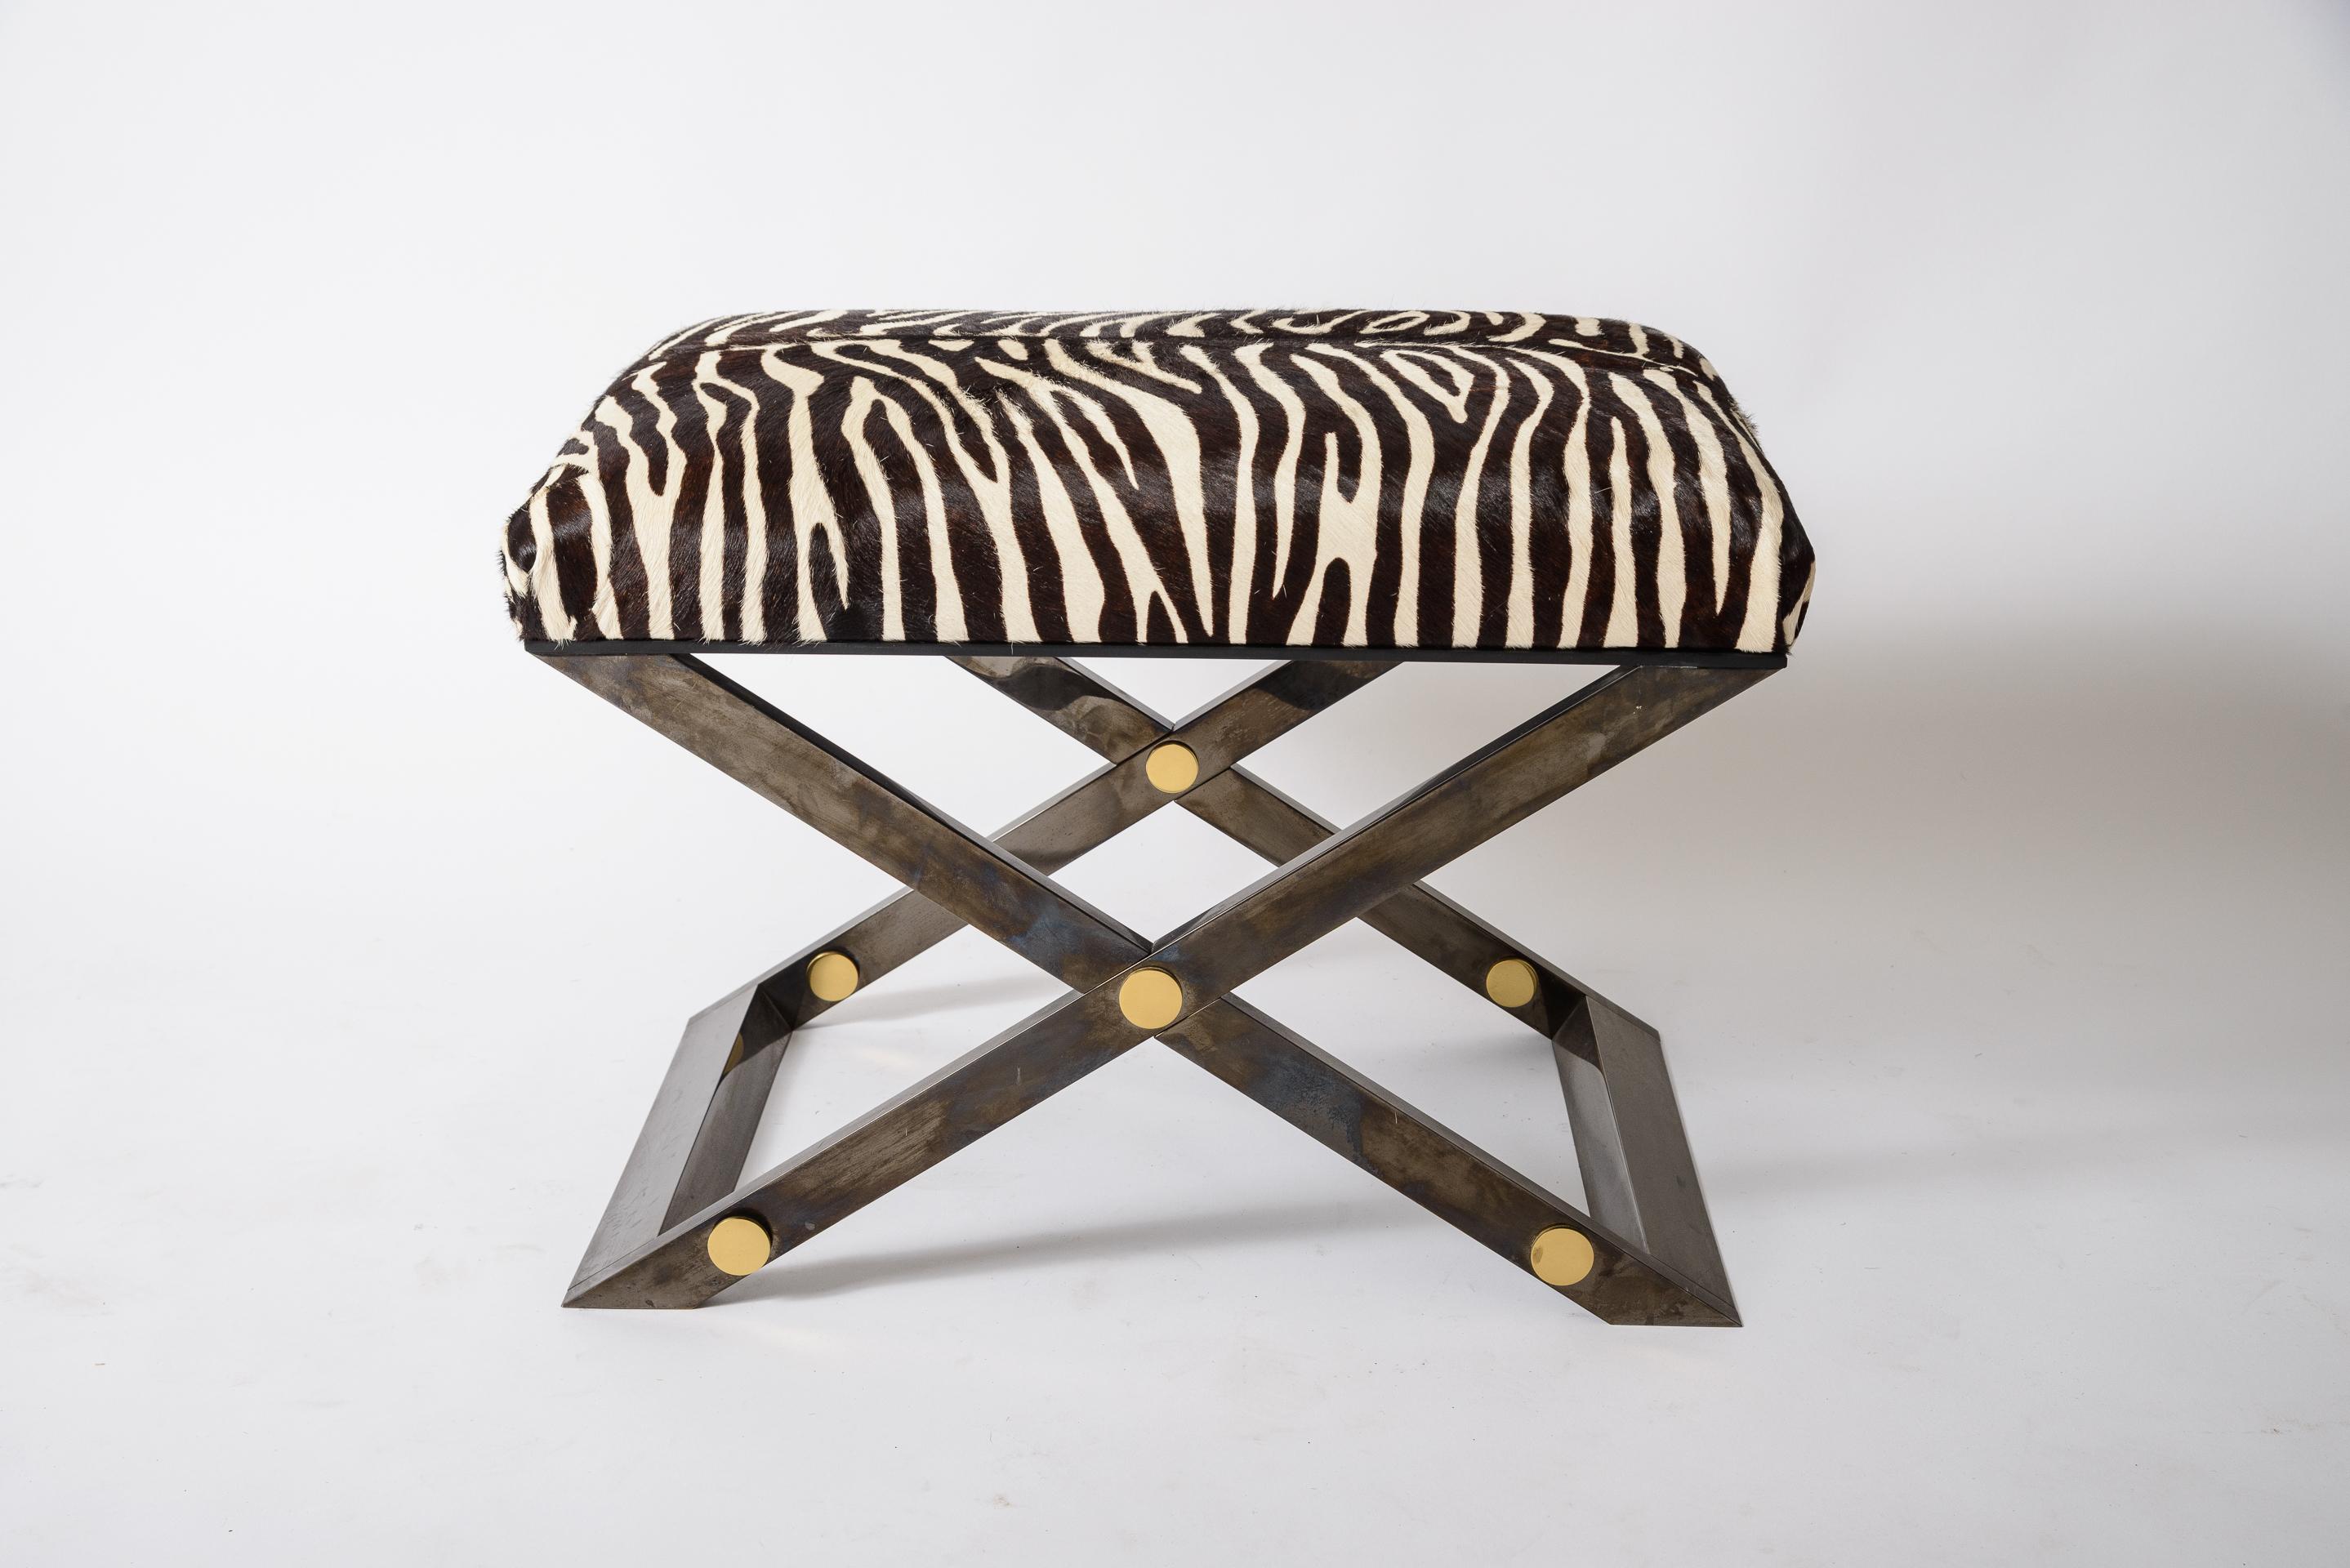 Karl Springer Pewter Finish Bench
Simplicity and detail
Clean original surface on metal
Zebra patterned ponyhair 
An identical Stool is pictured in a Karl Springer Showroom Catalog